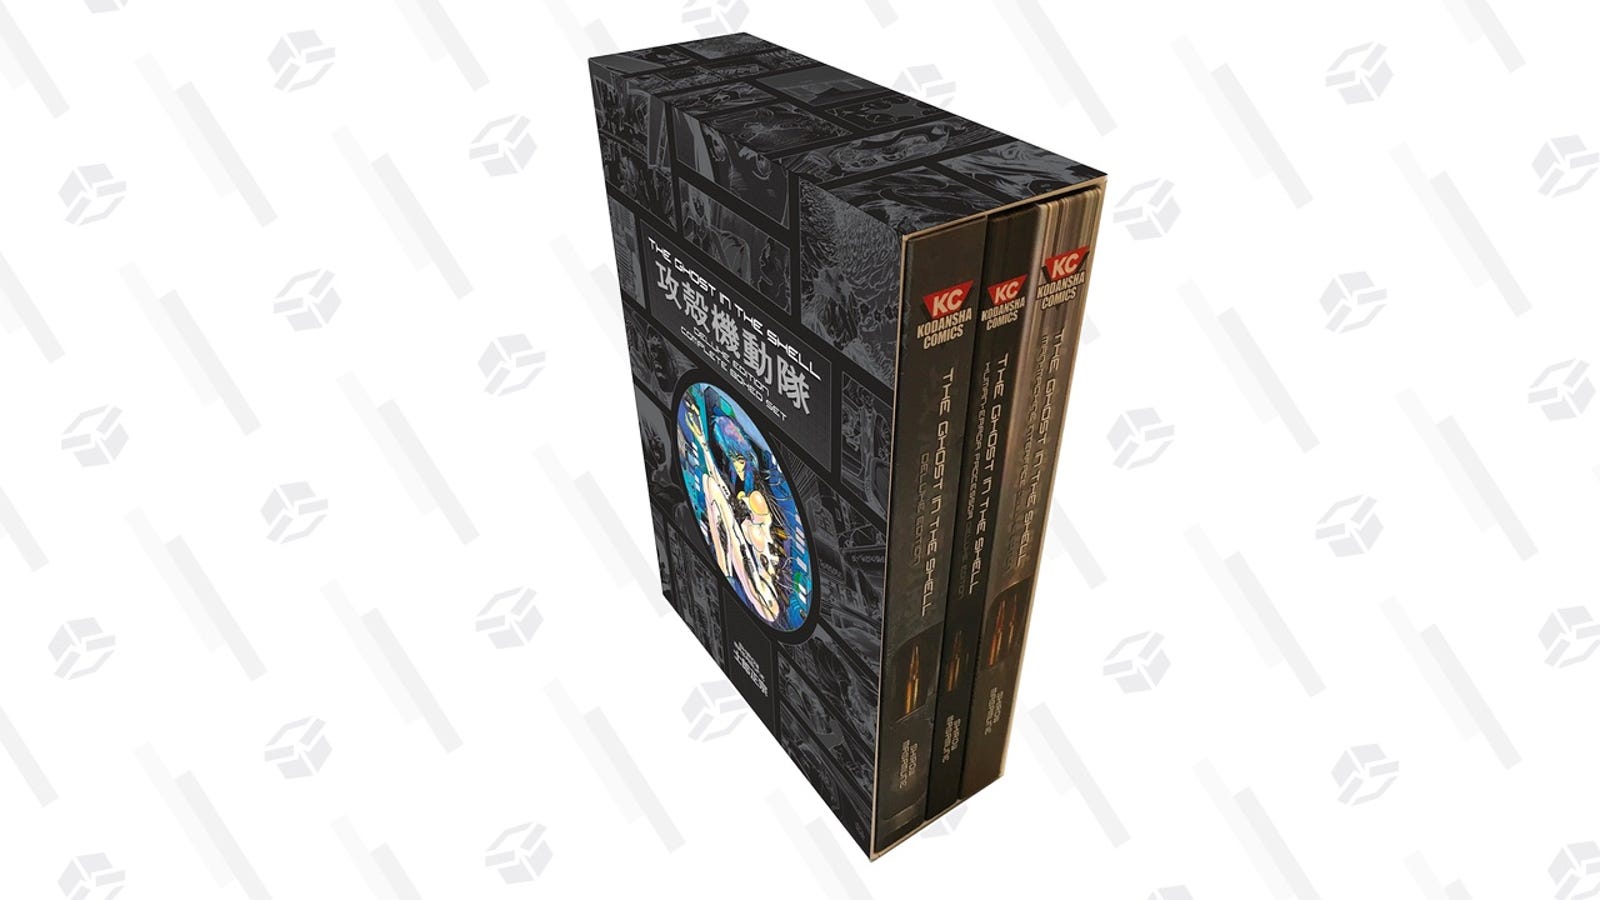 Score This Ghost In The Shell Manga Box Set For One of the Best Prices Ever1600 x 900